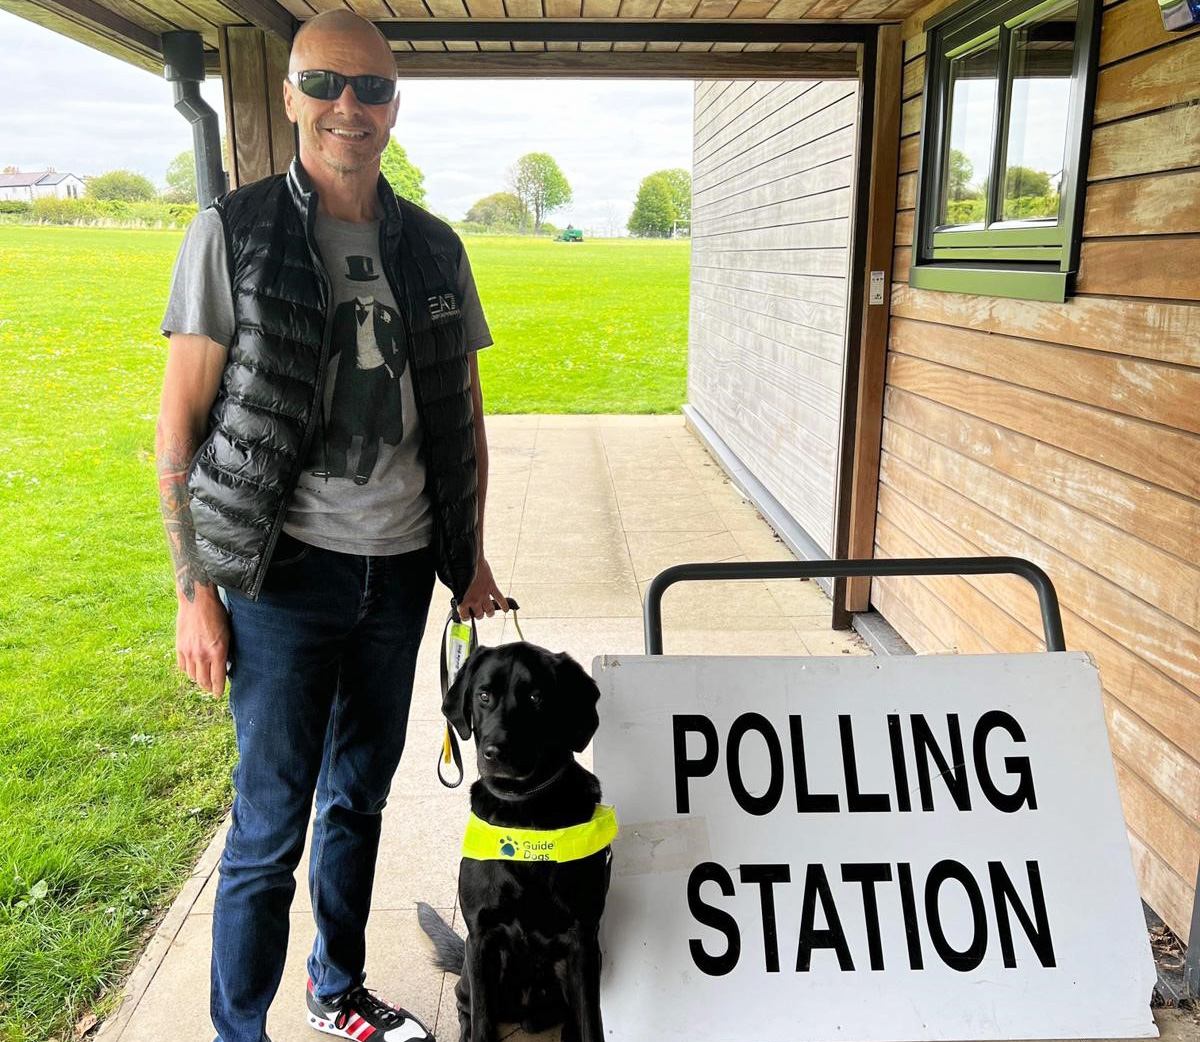 Thanks @GDteamspencer (And birthday boy - guide dog Spencer!) for sharing your #GuideDogsAtPollingStations pic...Could this be better than #DogsAtPollingStations? We think so!🐶

[VD: Alt text on image] https://t.co/z0gQDbCyEa